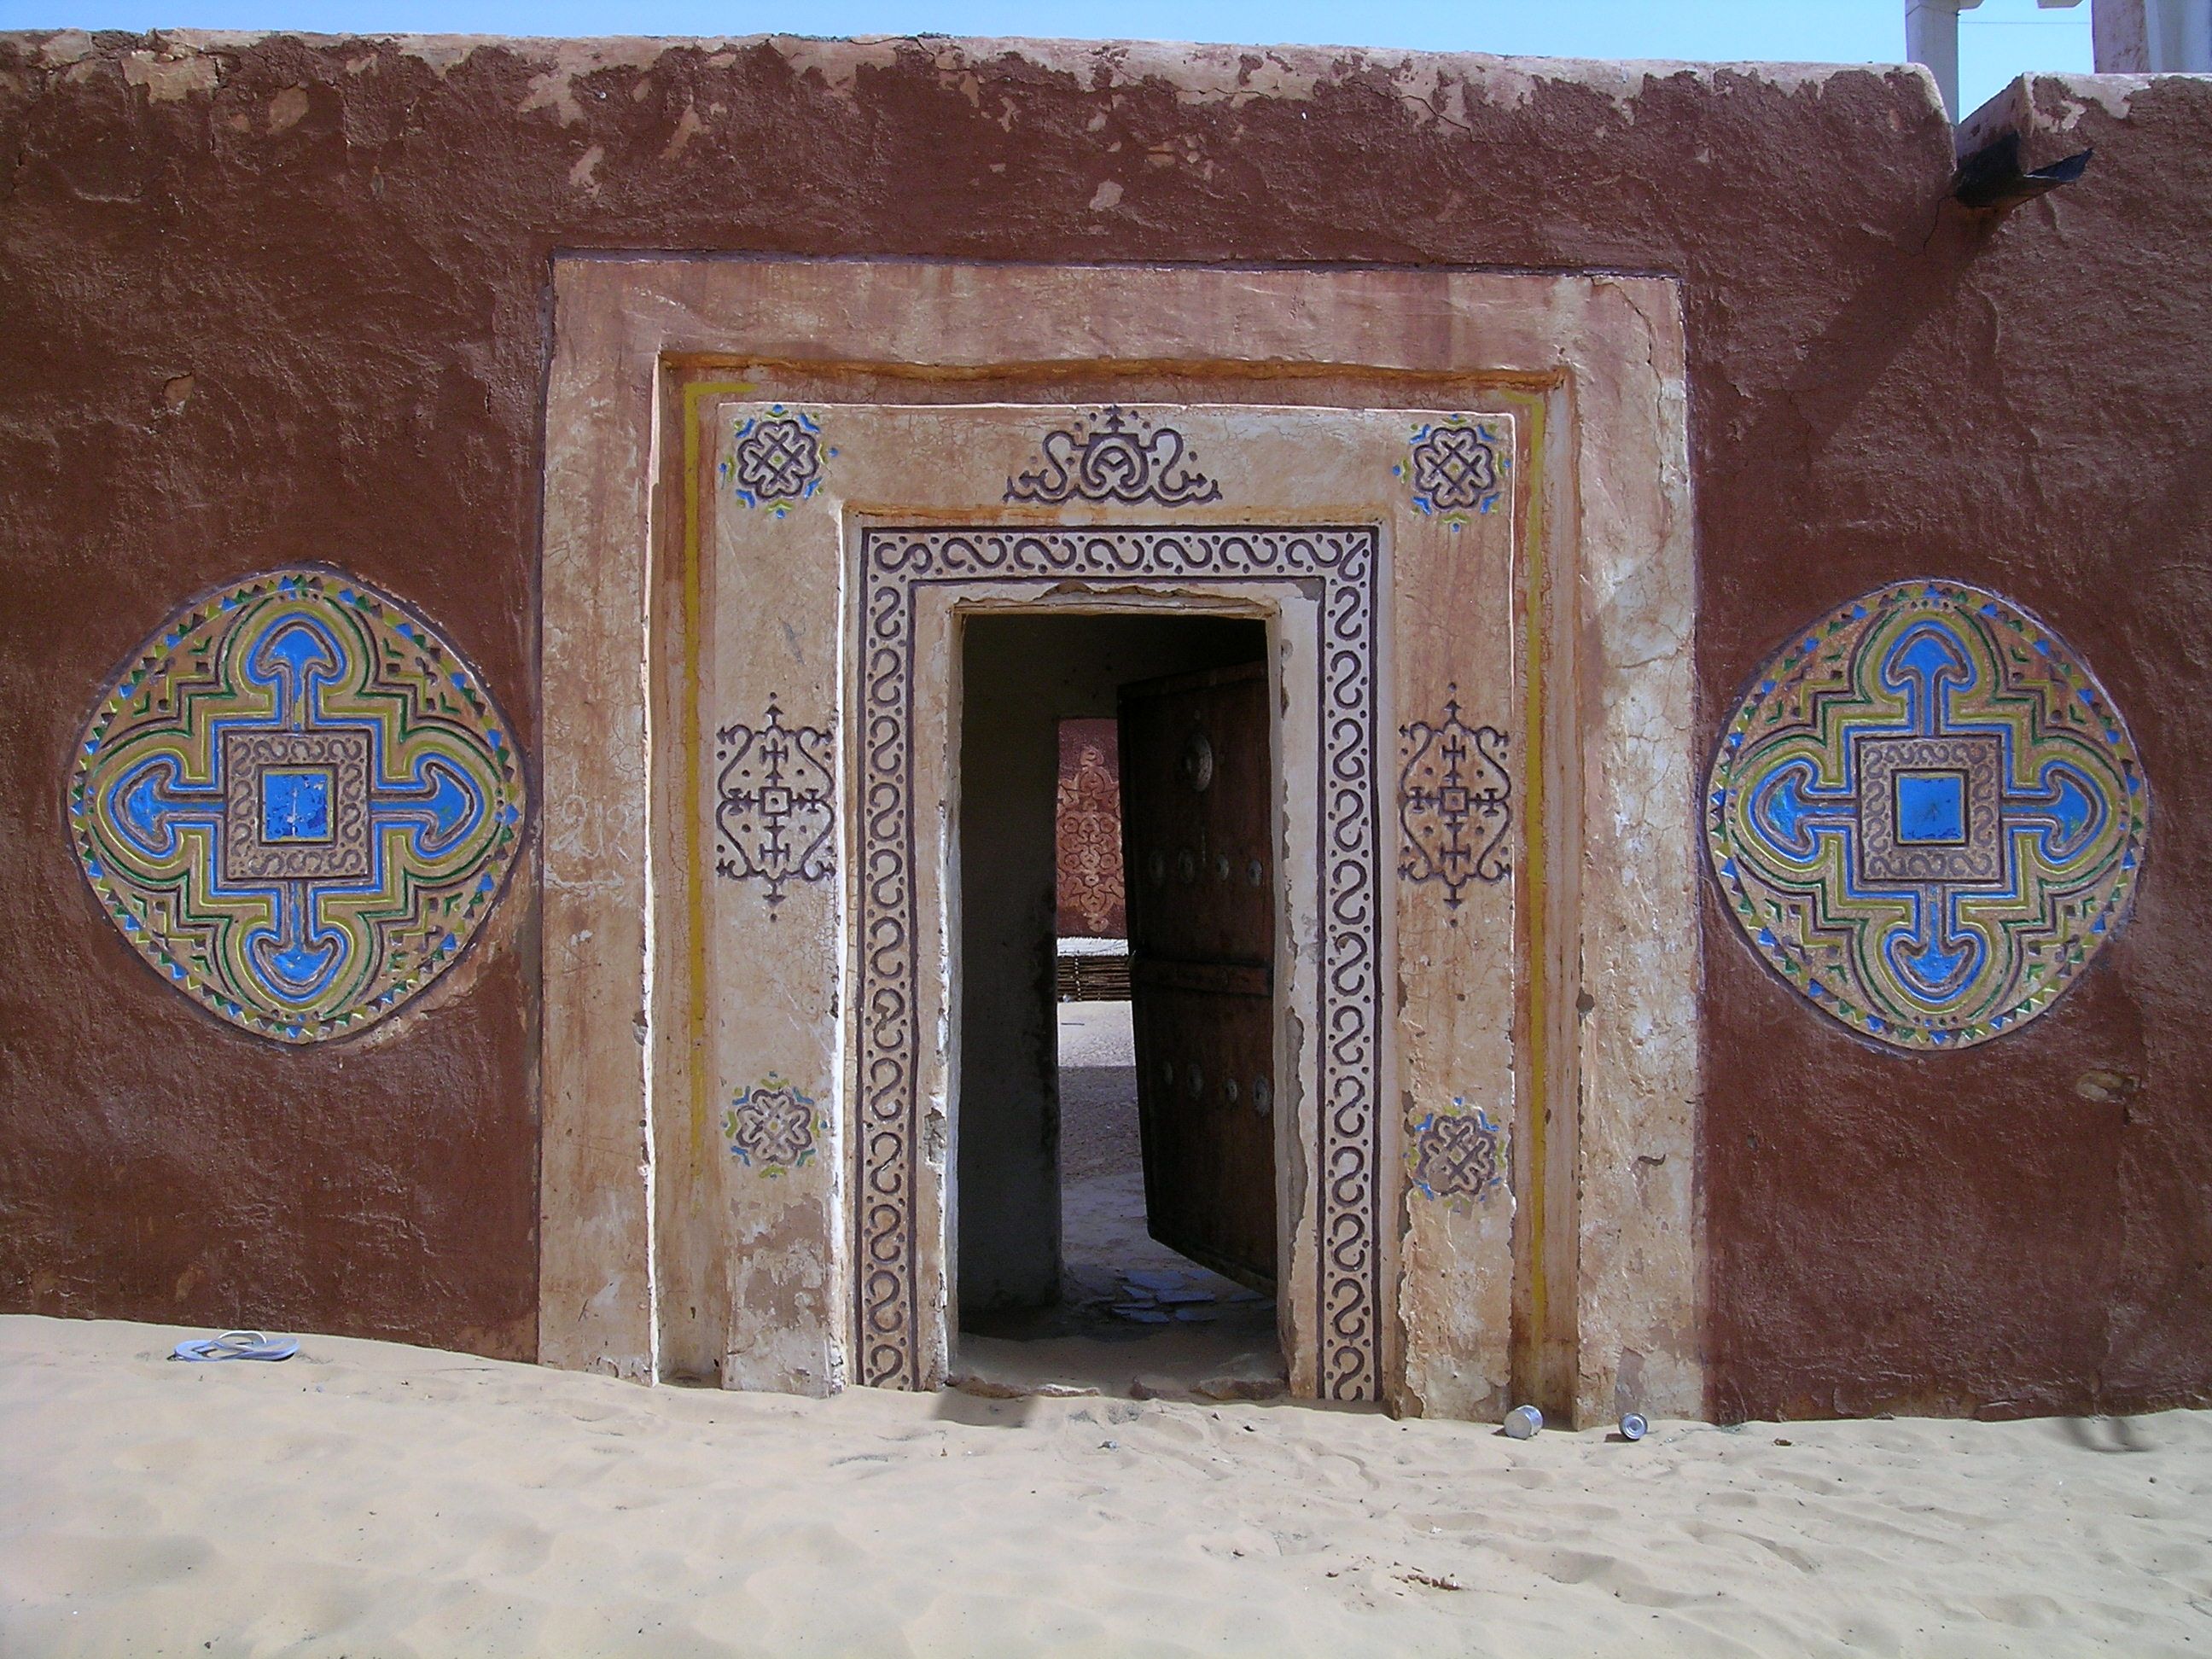 House entrance in the oasis town of Oualata, Mauritania